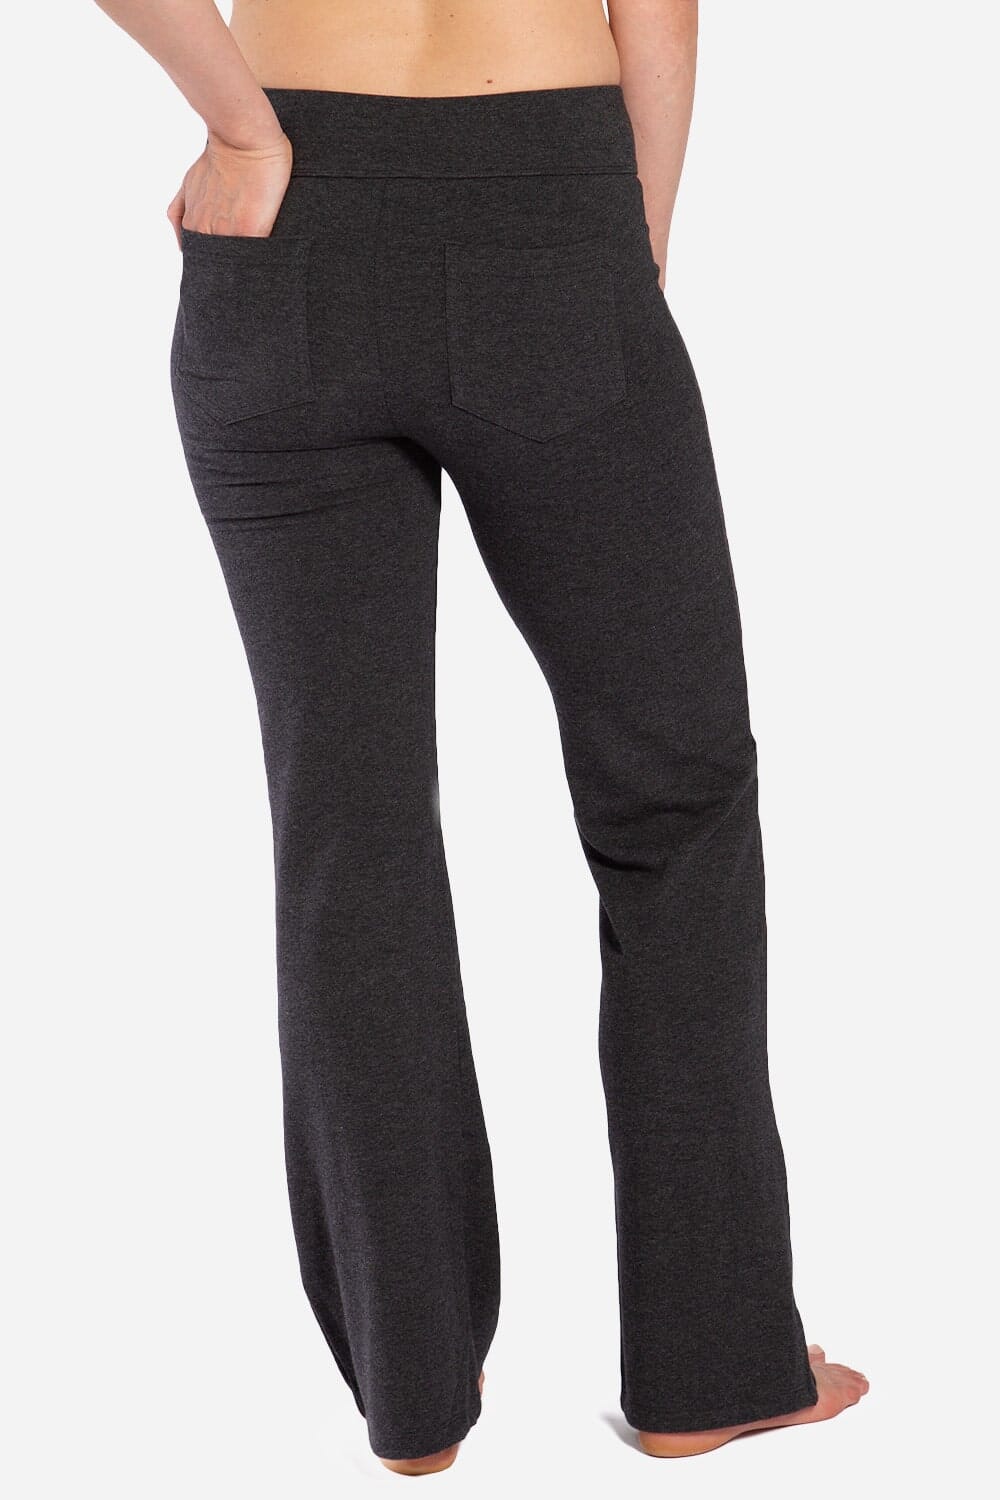 Women's Ponte Knit Pull-On Boot Leg Work Pant - NEW & IMPROVED FIT